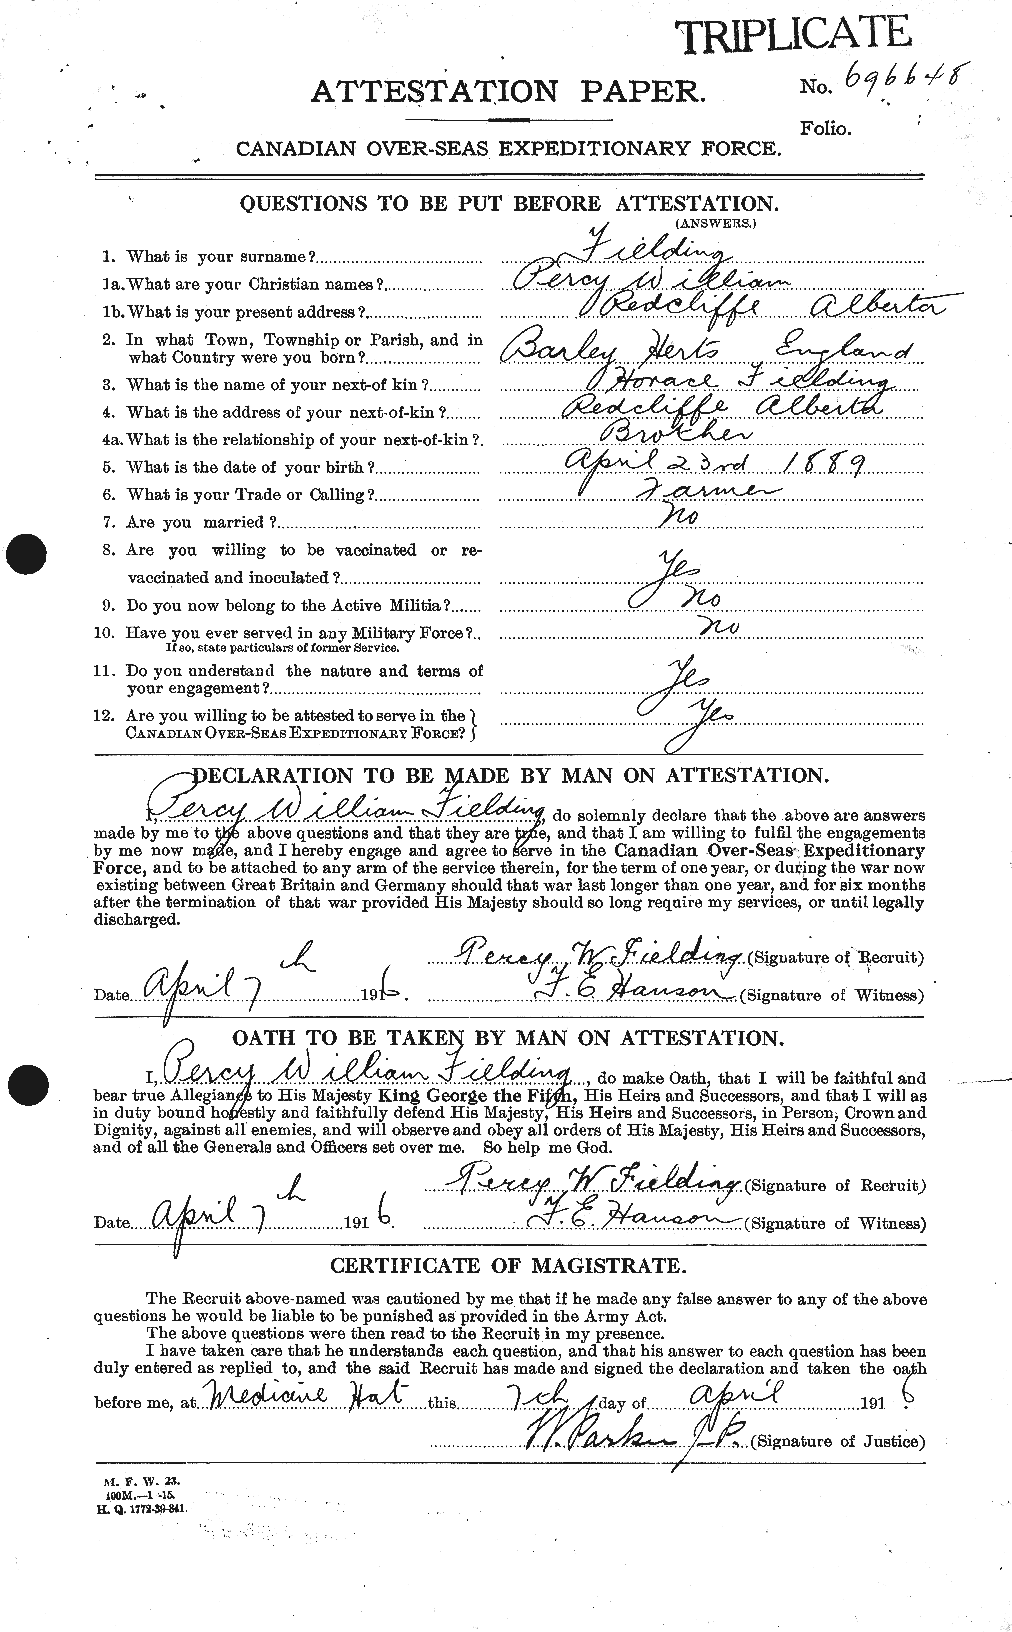 Personnel Records of the First World War - CEF 320944a